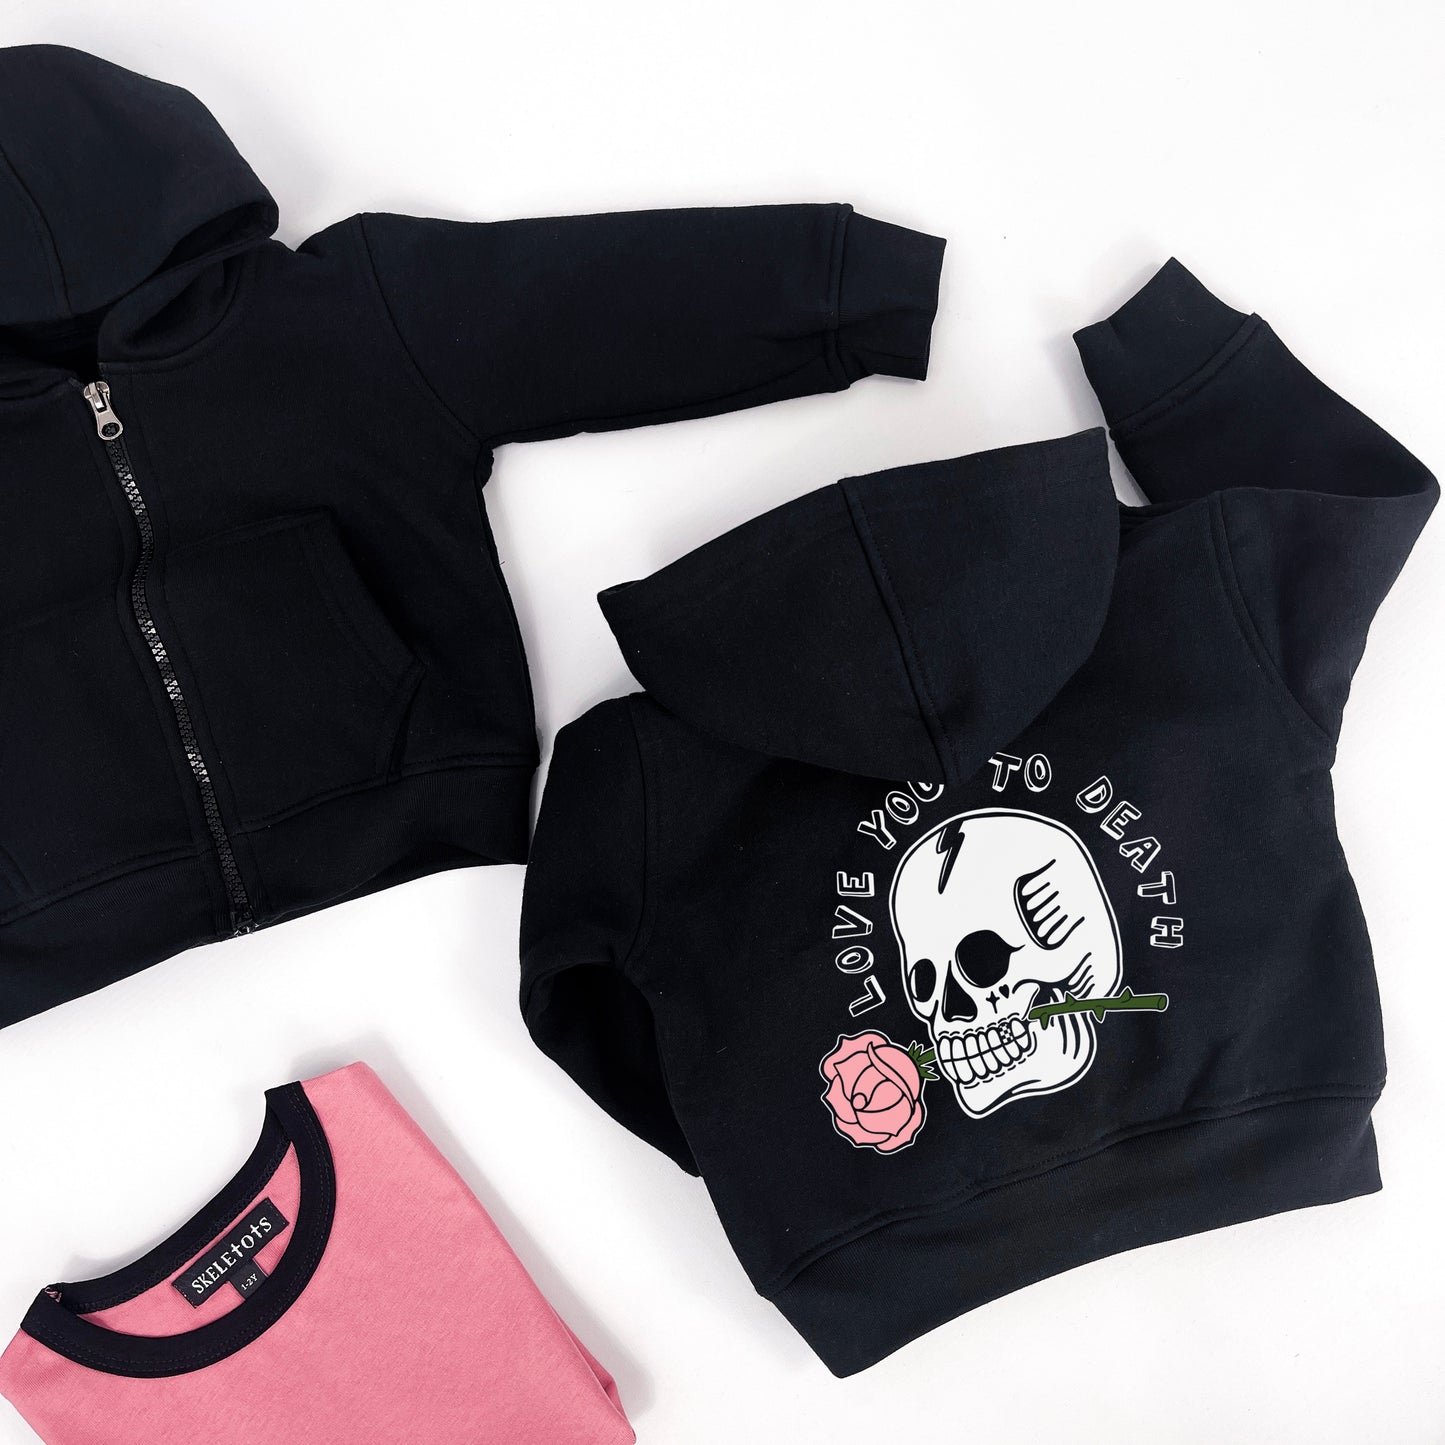 Kids black hoodie with "love you to death" printed on and a design of a skull holding a rose in its teeth